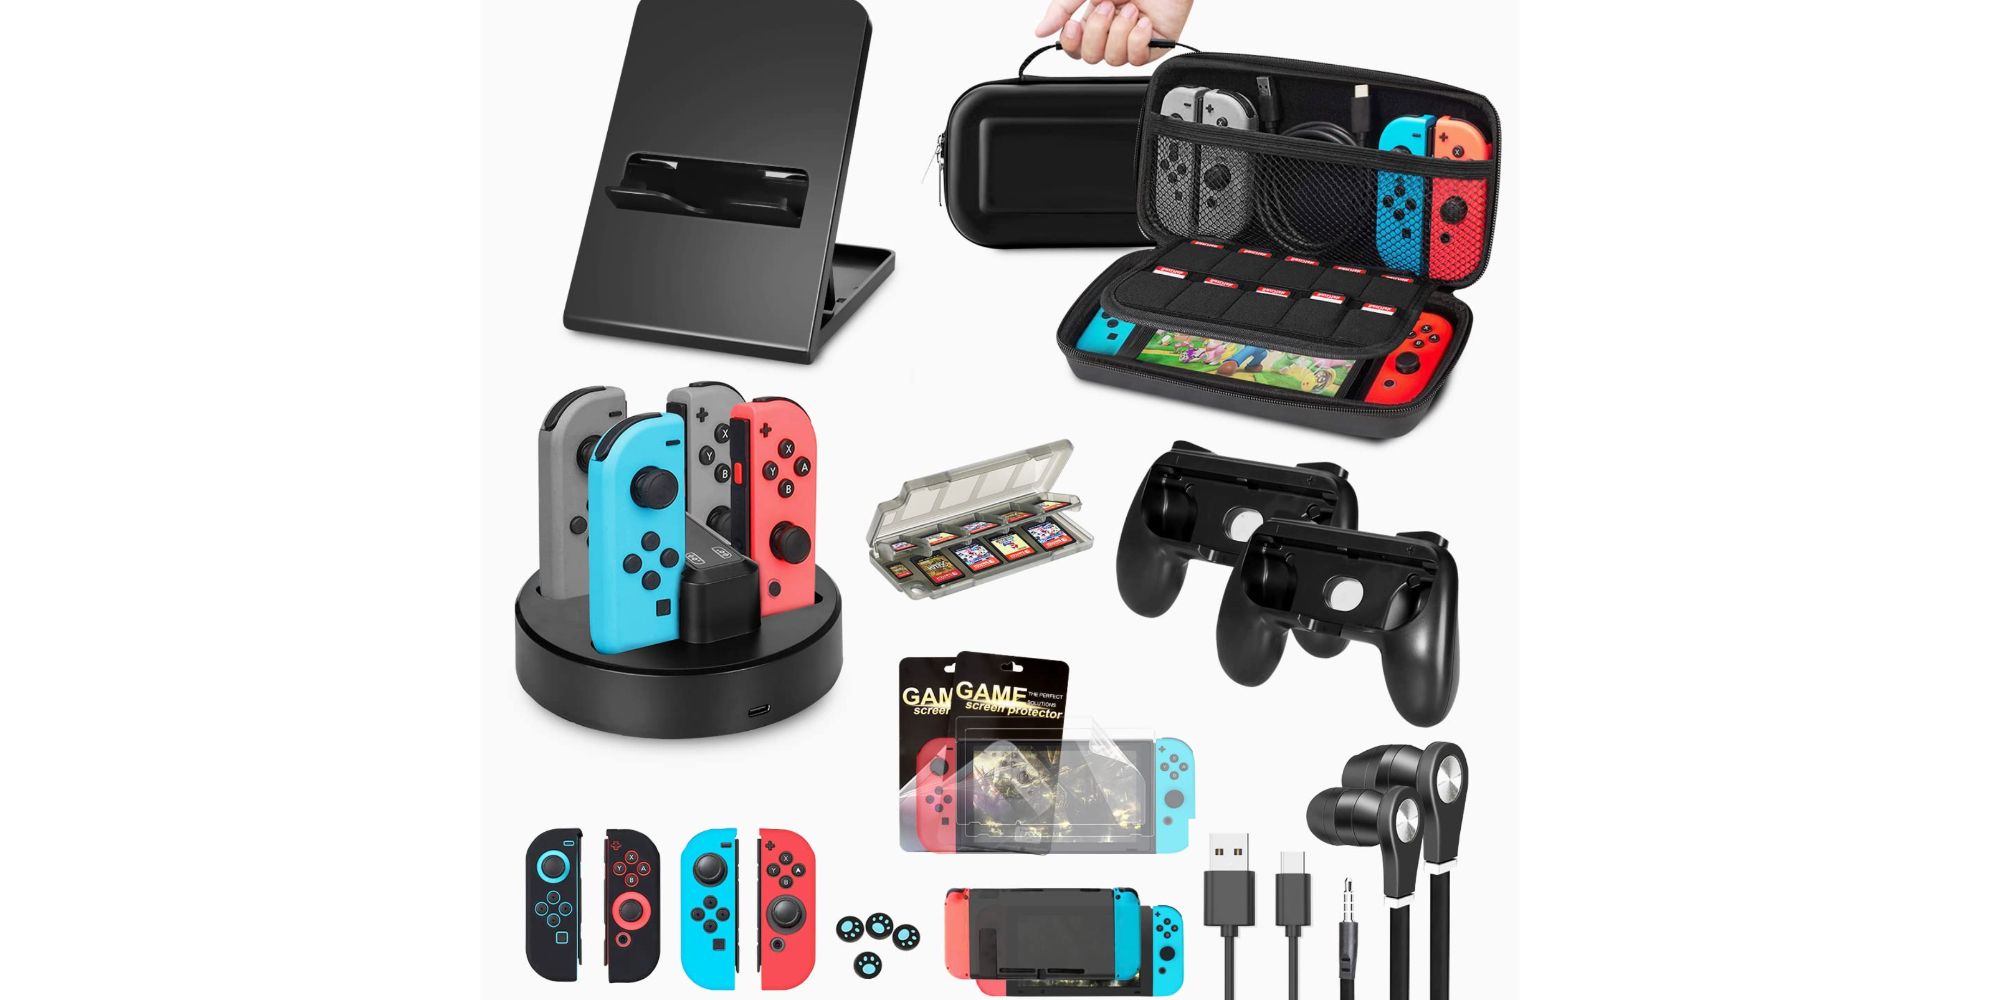 21-in-1 Nintendo Switch Accessories Bundle from Amazon